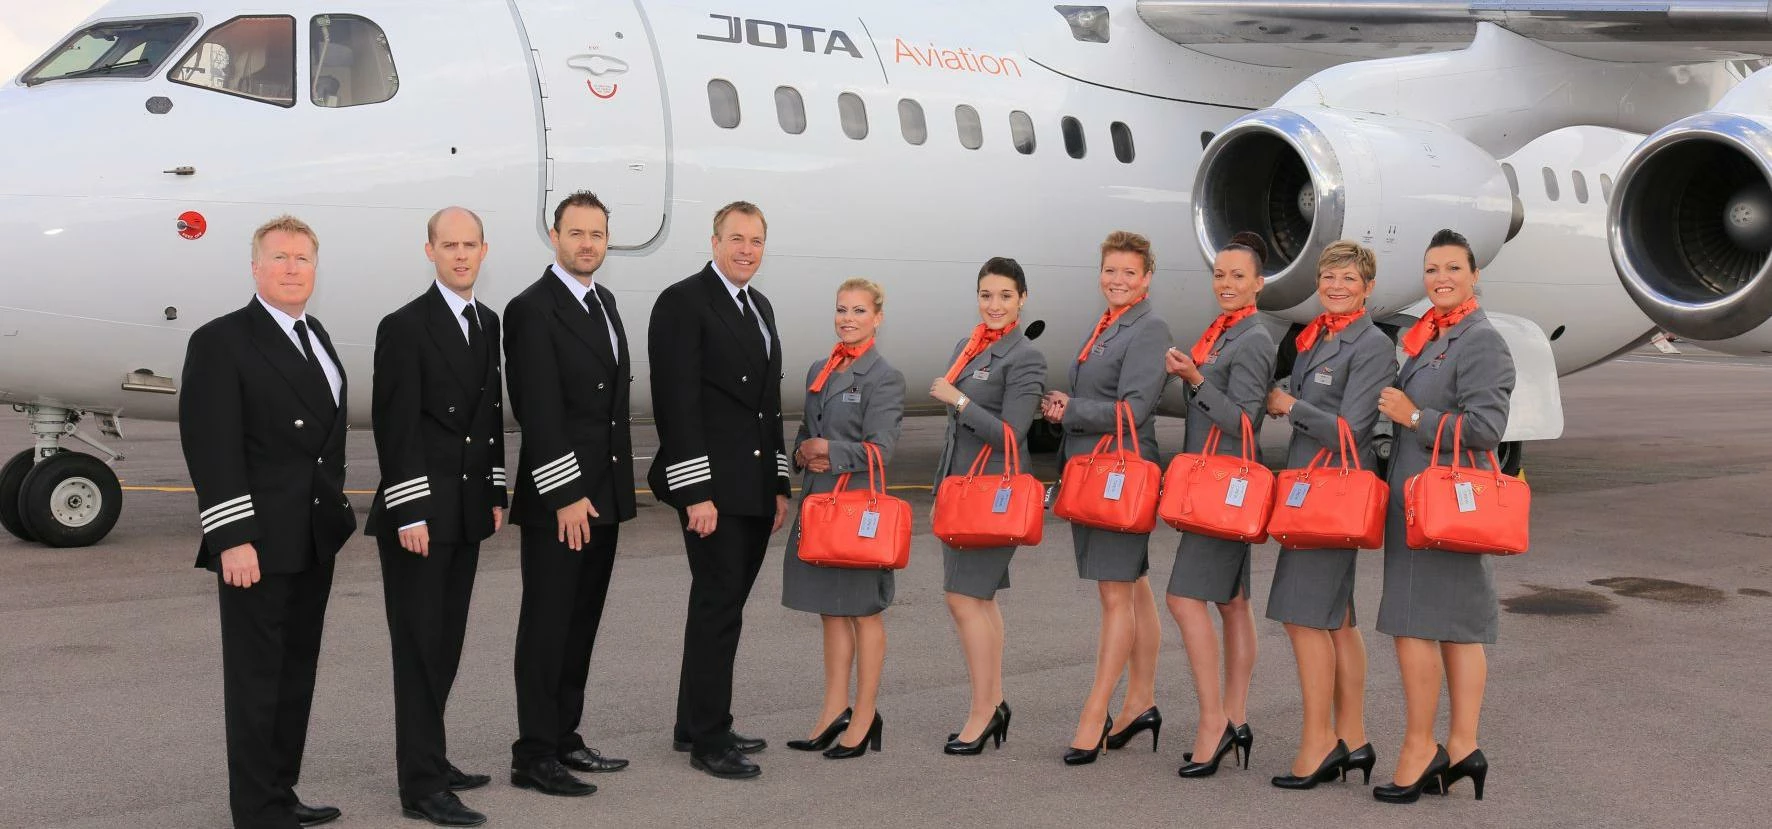 Jota Airline's smart new crew uniform accessories produced by Recognition Express Essex